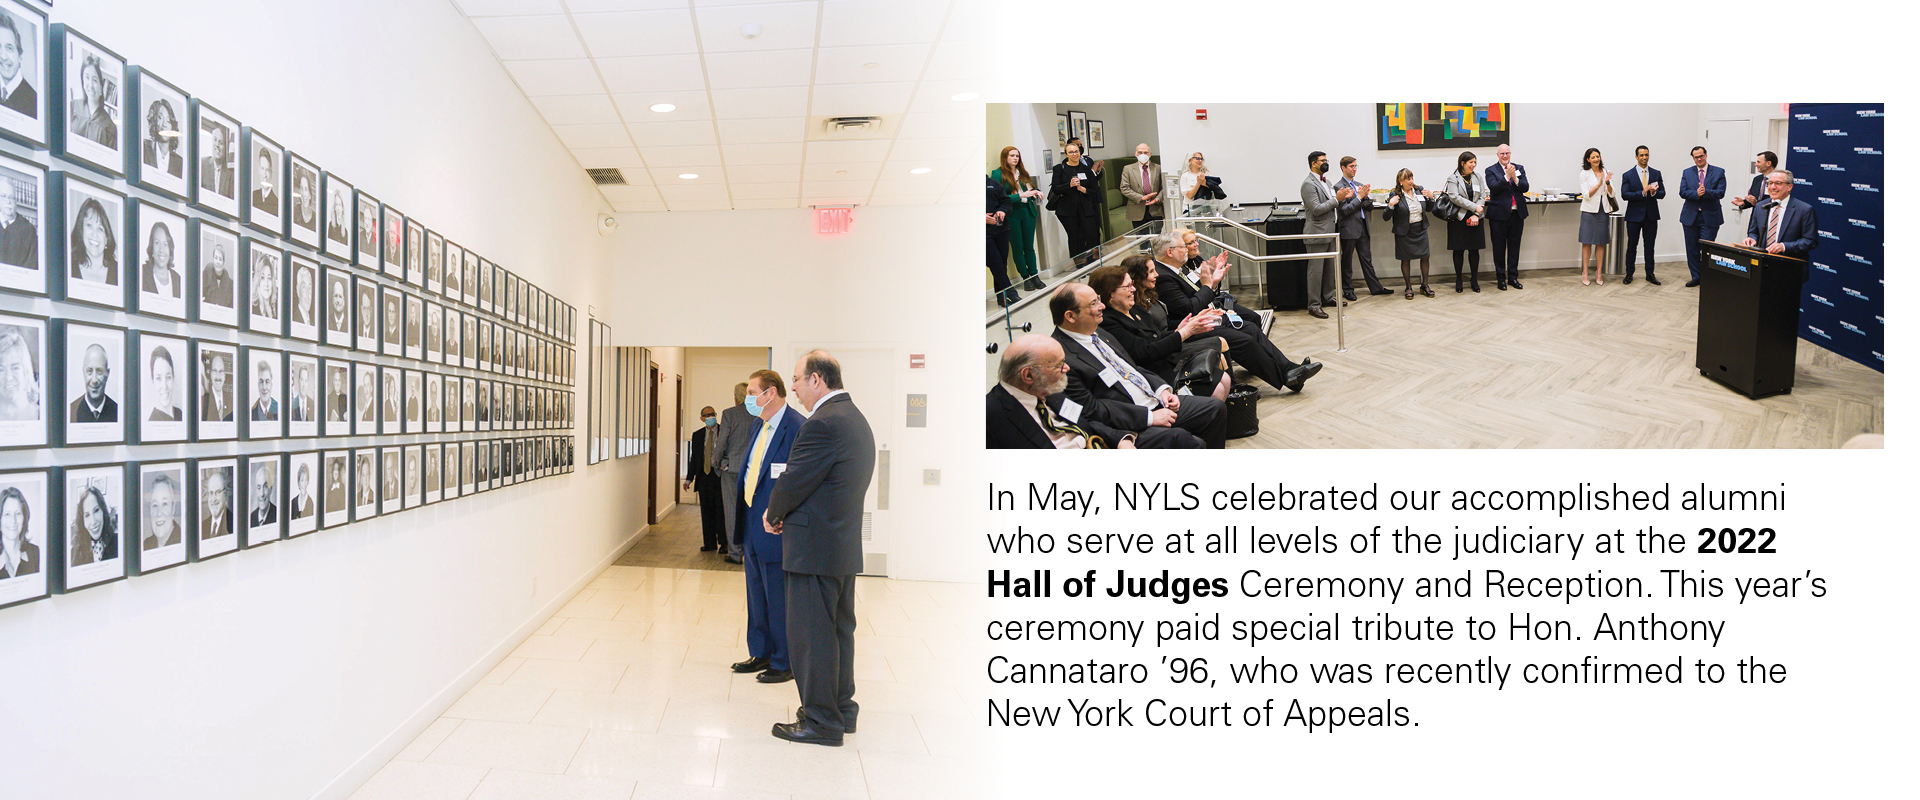 In May, NYLS celebrated our accomplished alumni who serve at all levels of the judiciary at the 2022 Hall of Judges Ceremony and Reception. This year’s ceremony paid special tribute to Hon. Anthony Cannataro ’96, who was recently confirmed to the New York Court of Appeals.